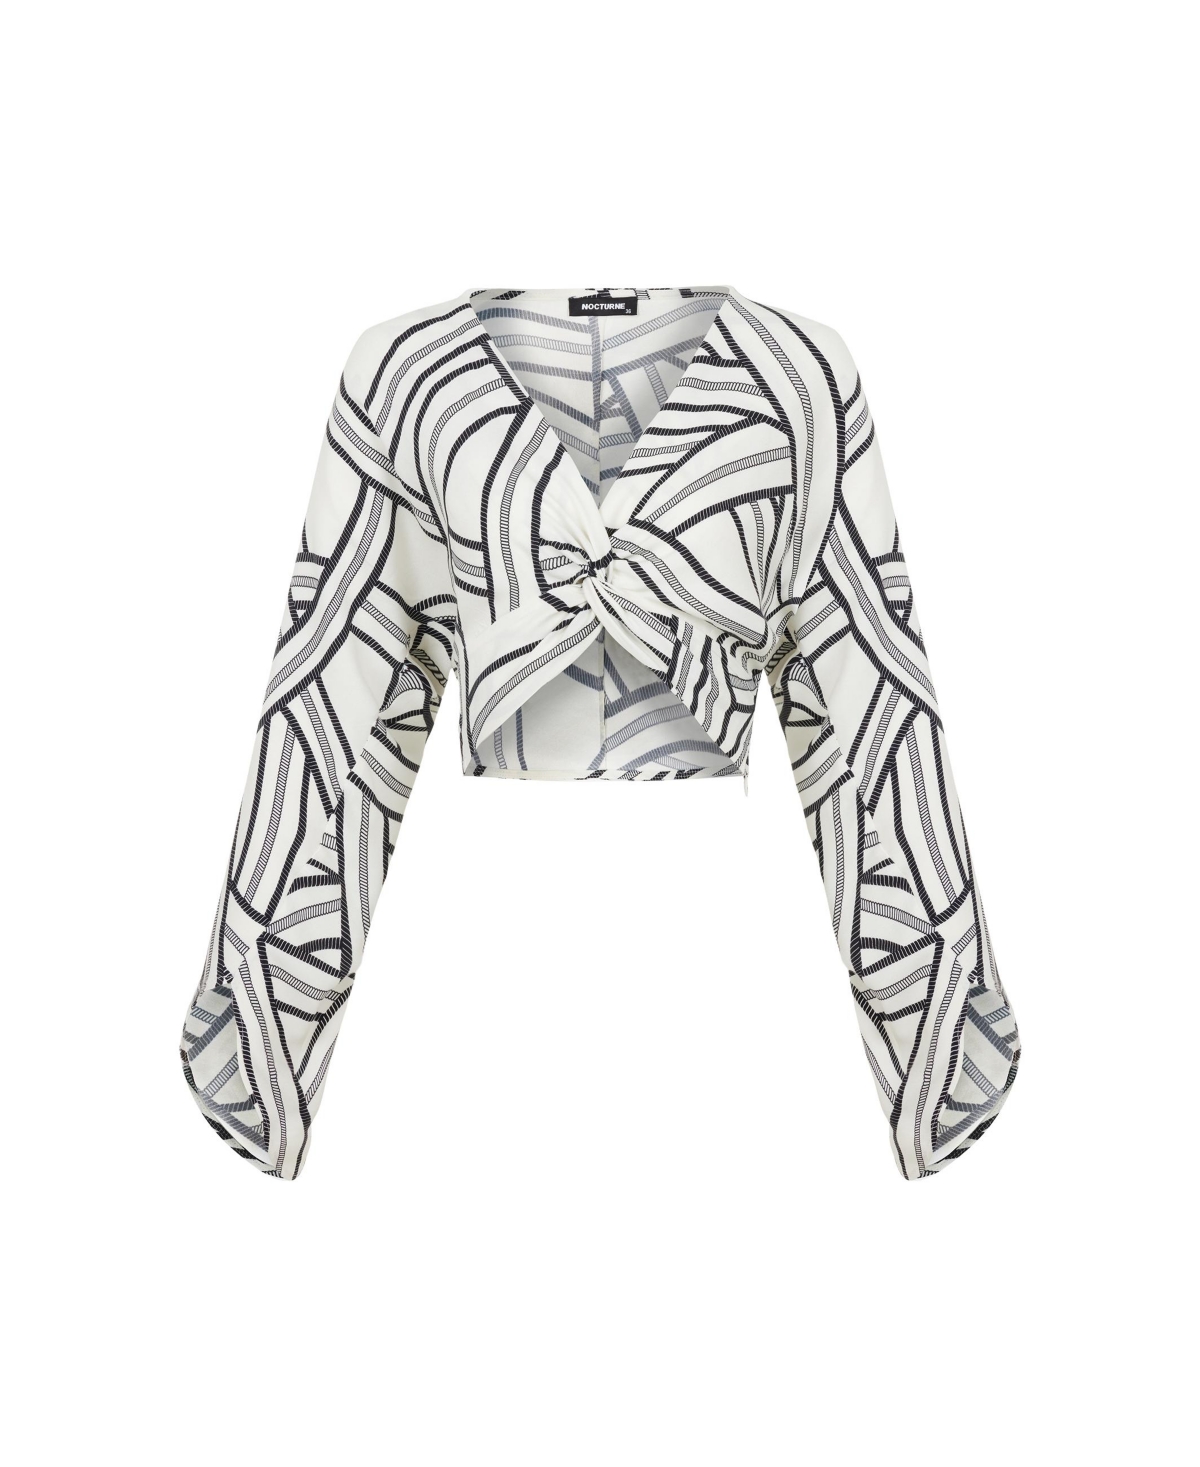 NOCTURNE WOMEN'S PRINTED CROP TOP WITH KNOT